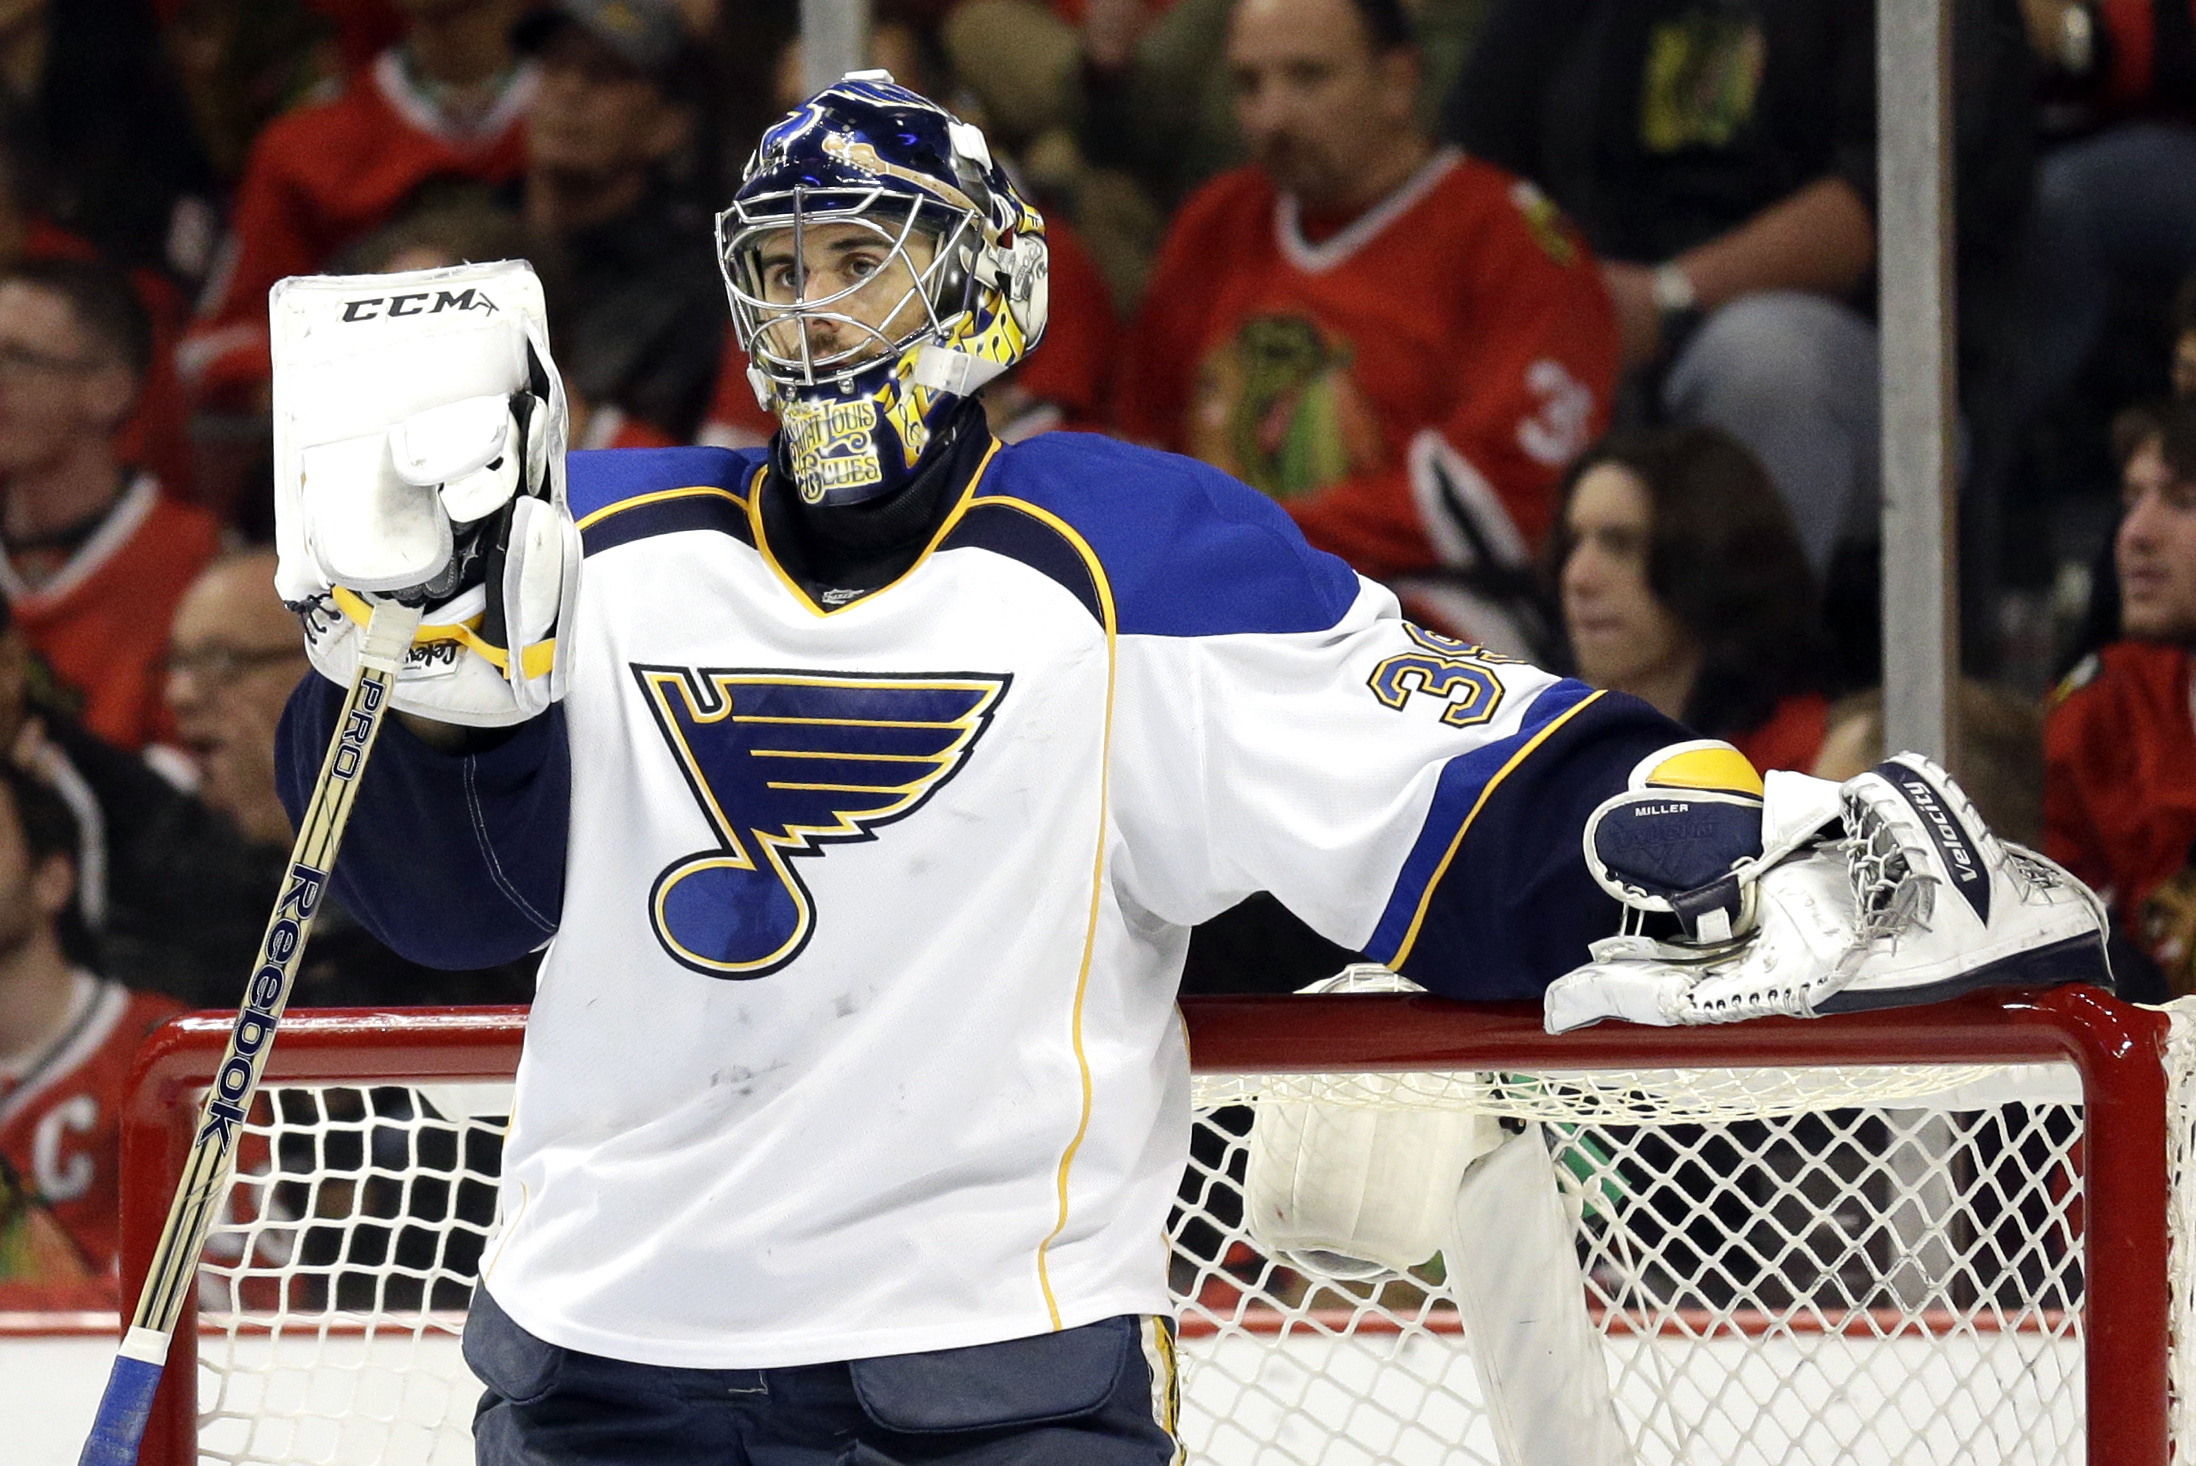 Miller Times: Moments of note in the career of Ryan Miller